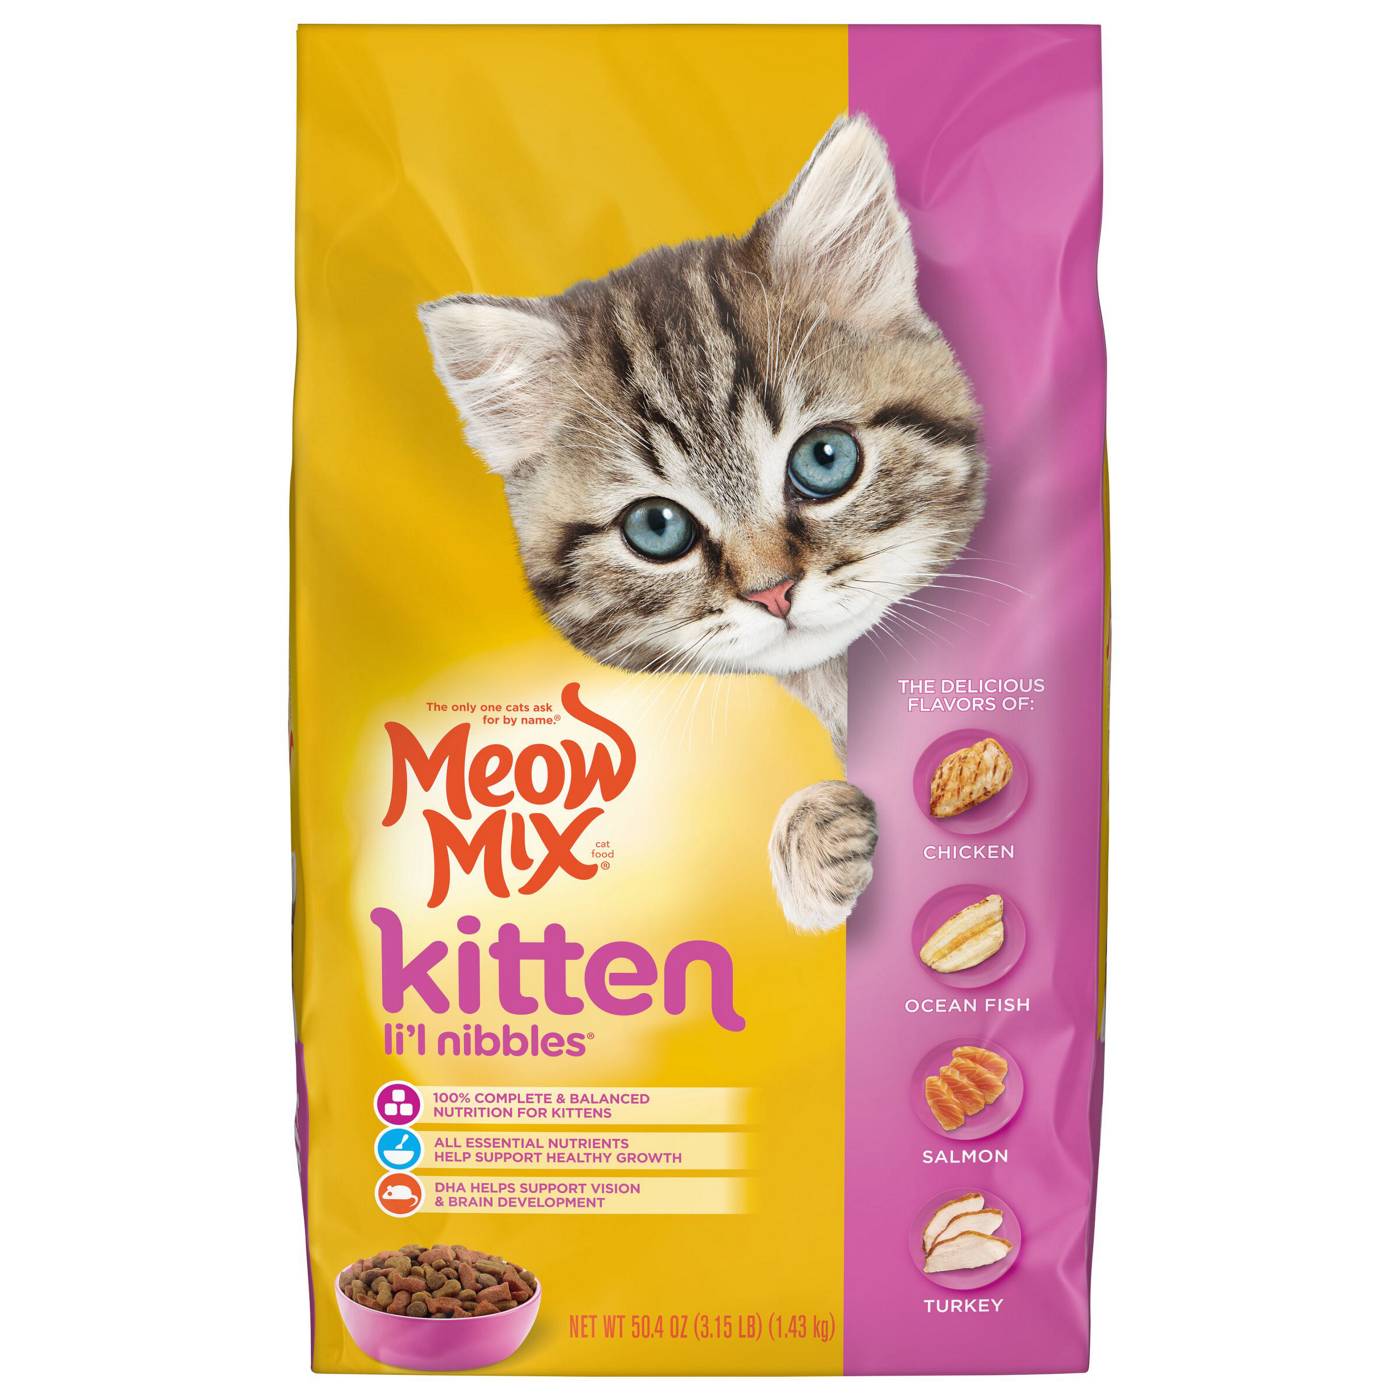 Meow Mix Kitten Lil' Nibbles Dry Cat Food; image 1 of 7